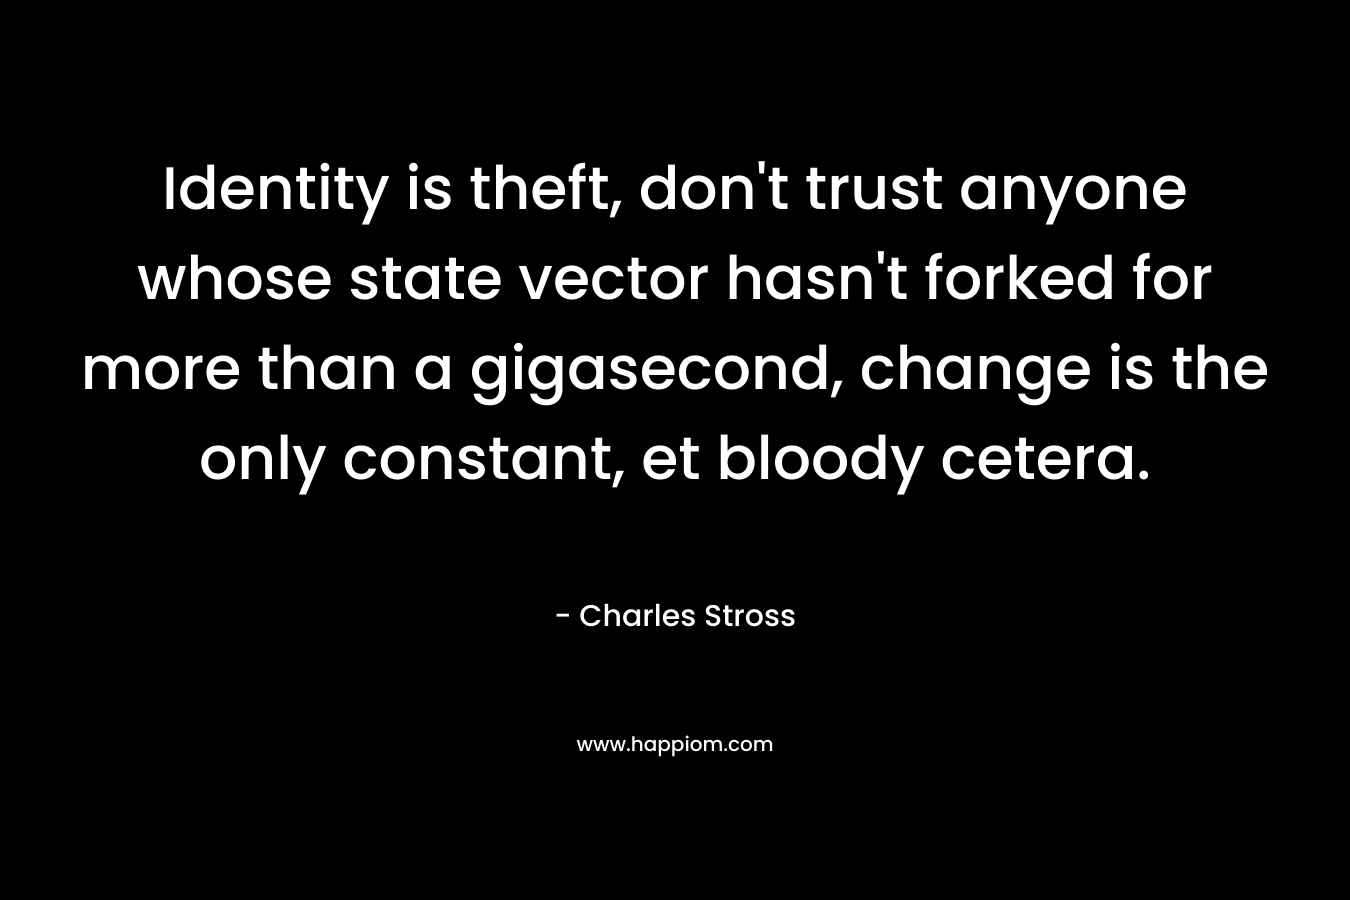 Identity is theft, don’t trust anyone whose state vector hasn’t forked for more than a gigasecond, change is the only constant, et bloody cetera. – Charles Stross